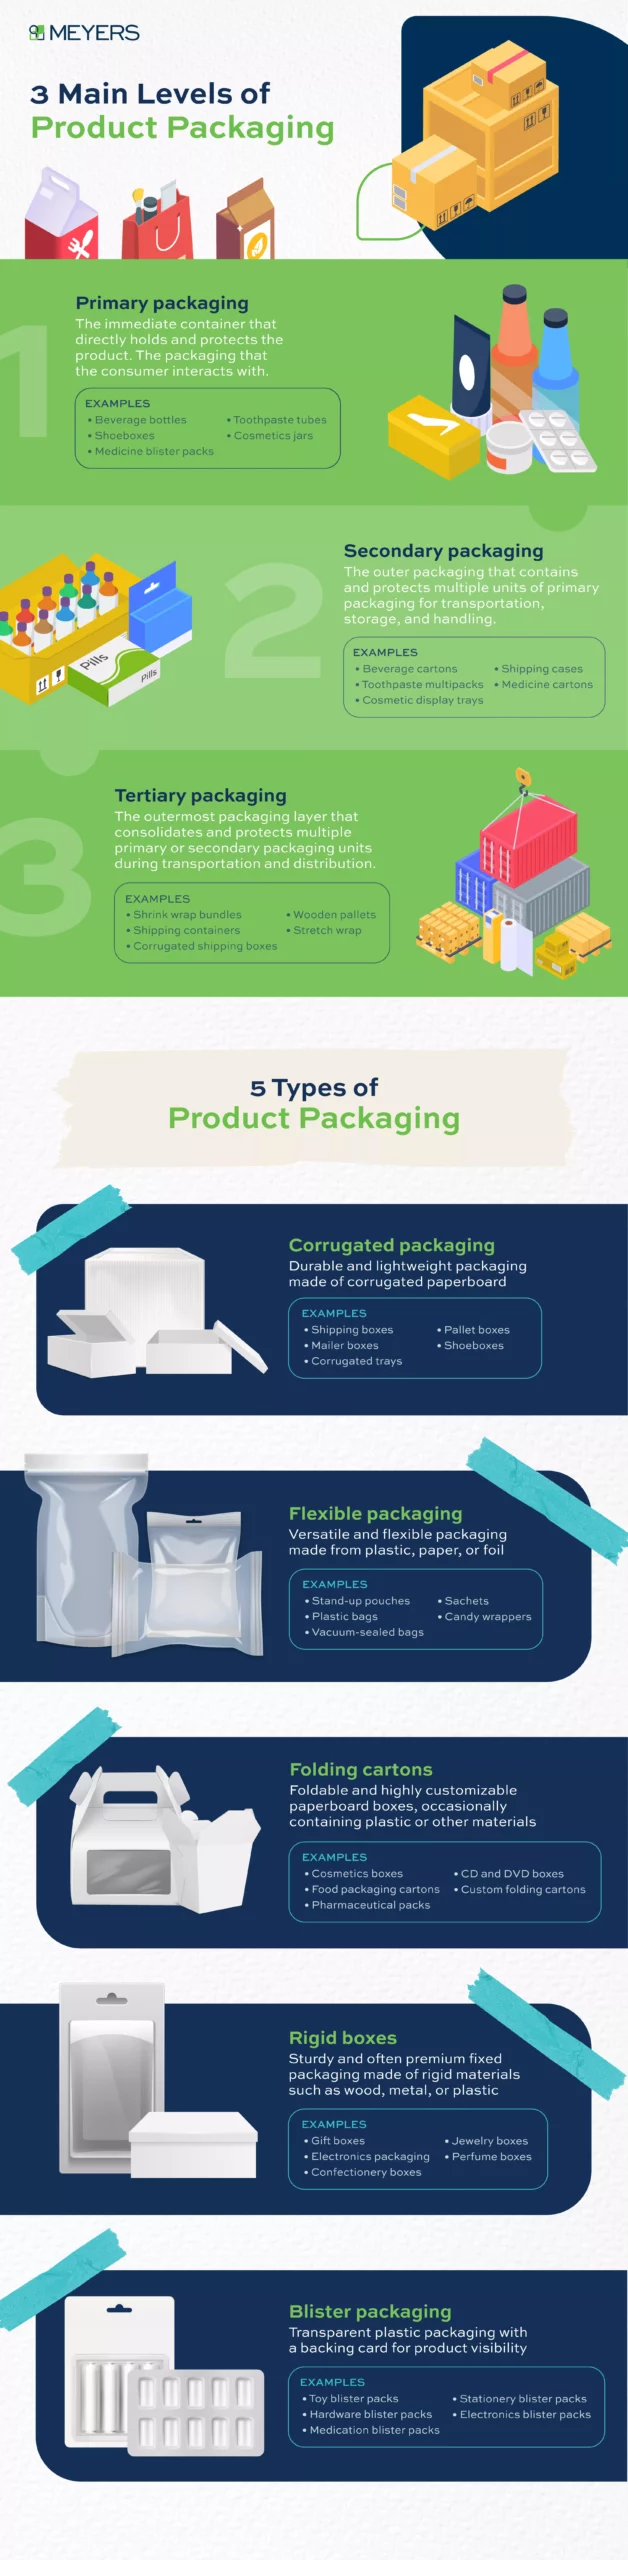 types of product packaging